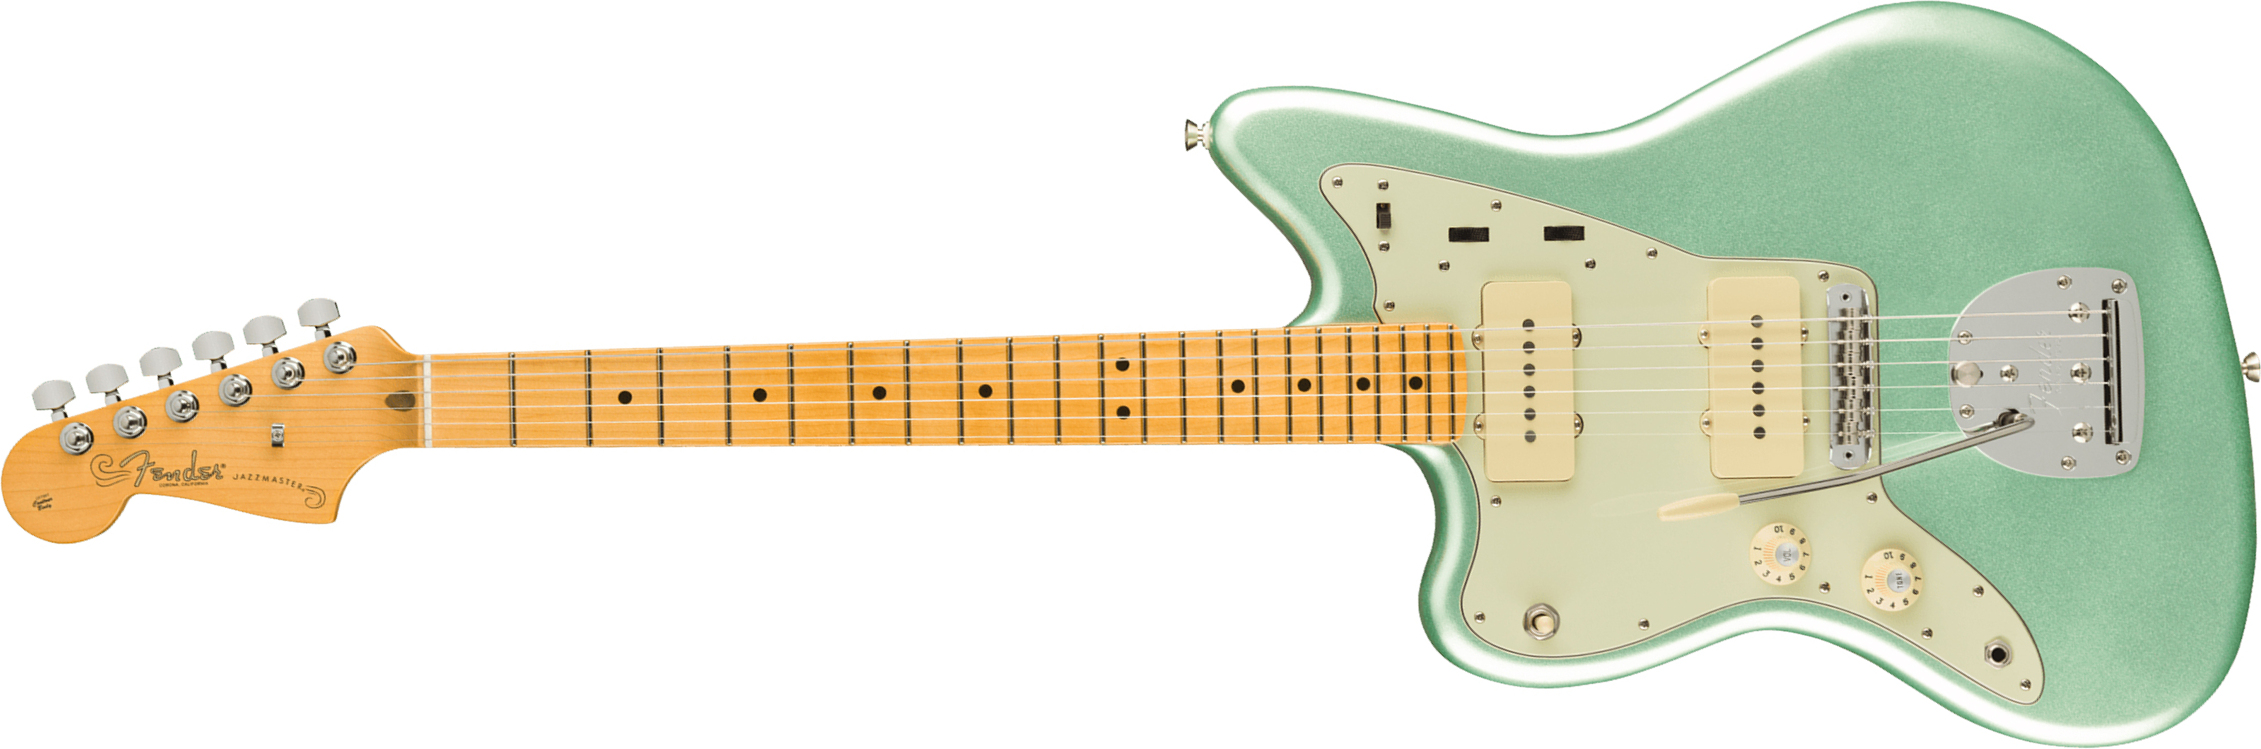 Fender Jazzmaster American Professional Ii Lh Gaucher Usa Mn - Mystic Surf Green - Left-handed electric guitar - Main picture